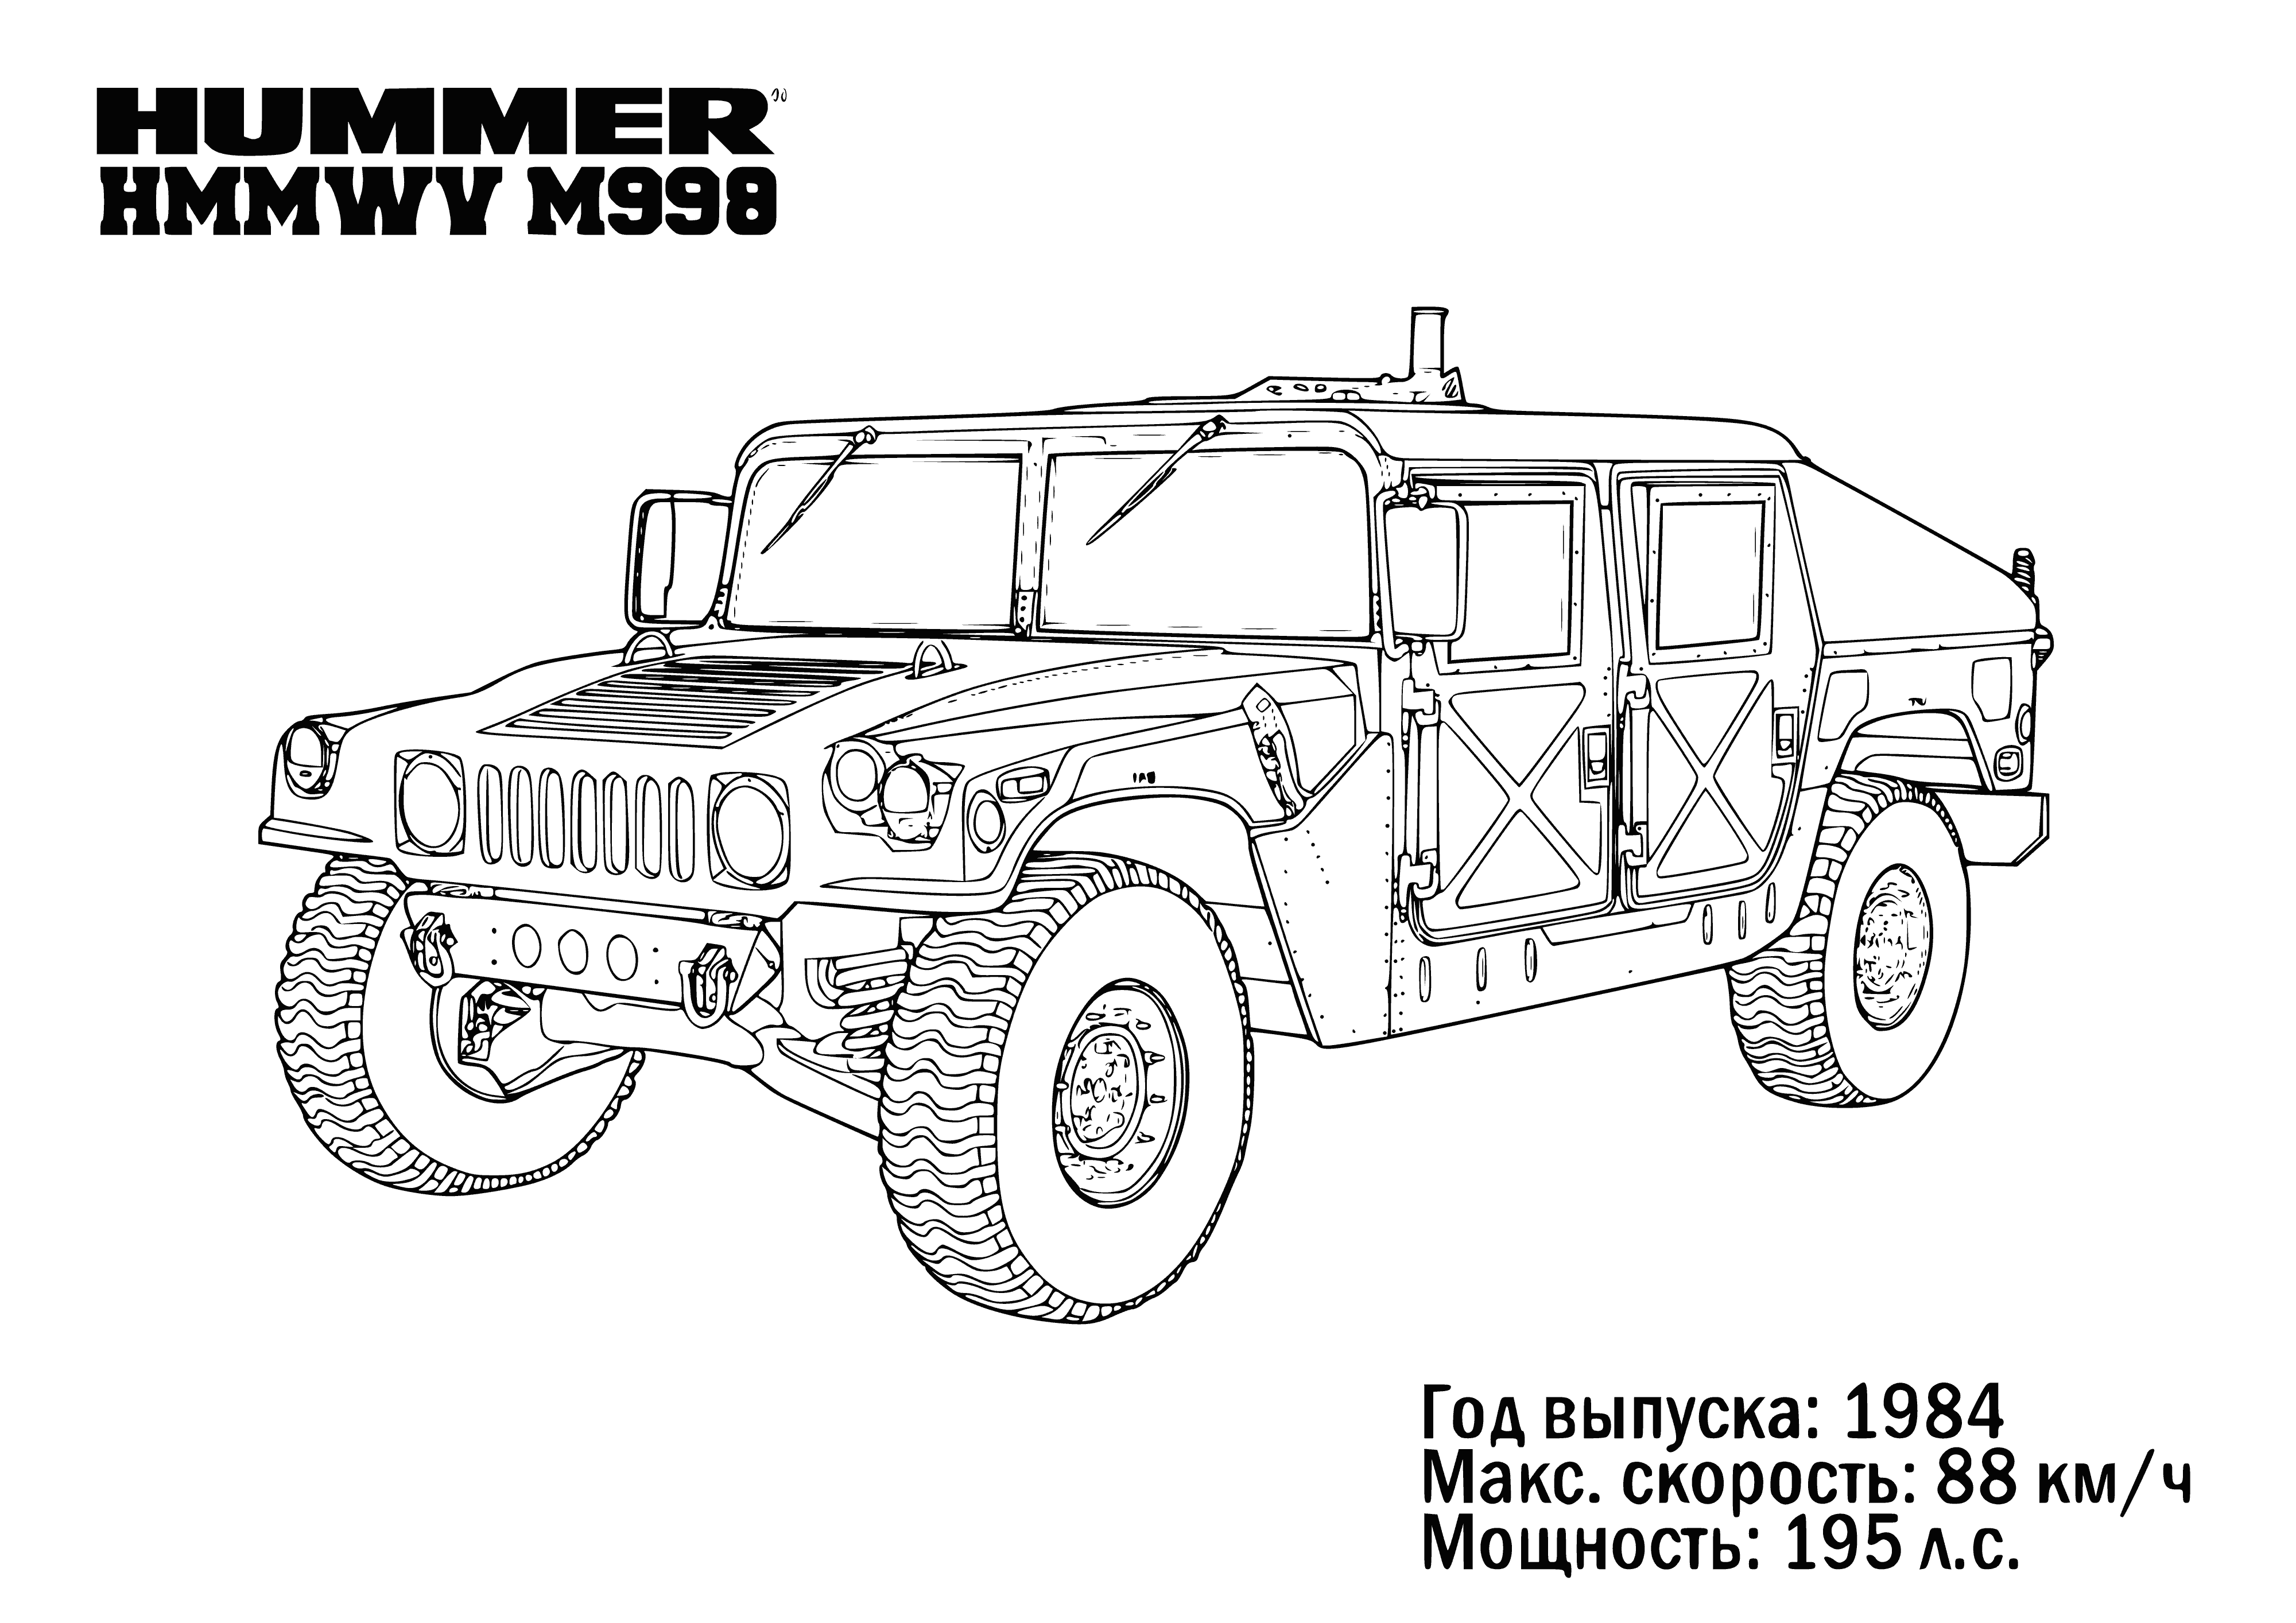 coloring page: Hummer: Boxy SUV w/ wide grille, small round headlights, square taillights, tire treads, flat roof, & four doors. #ClassicSUV